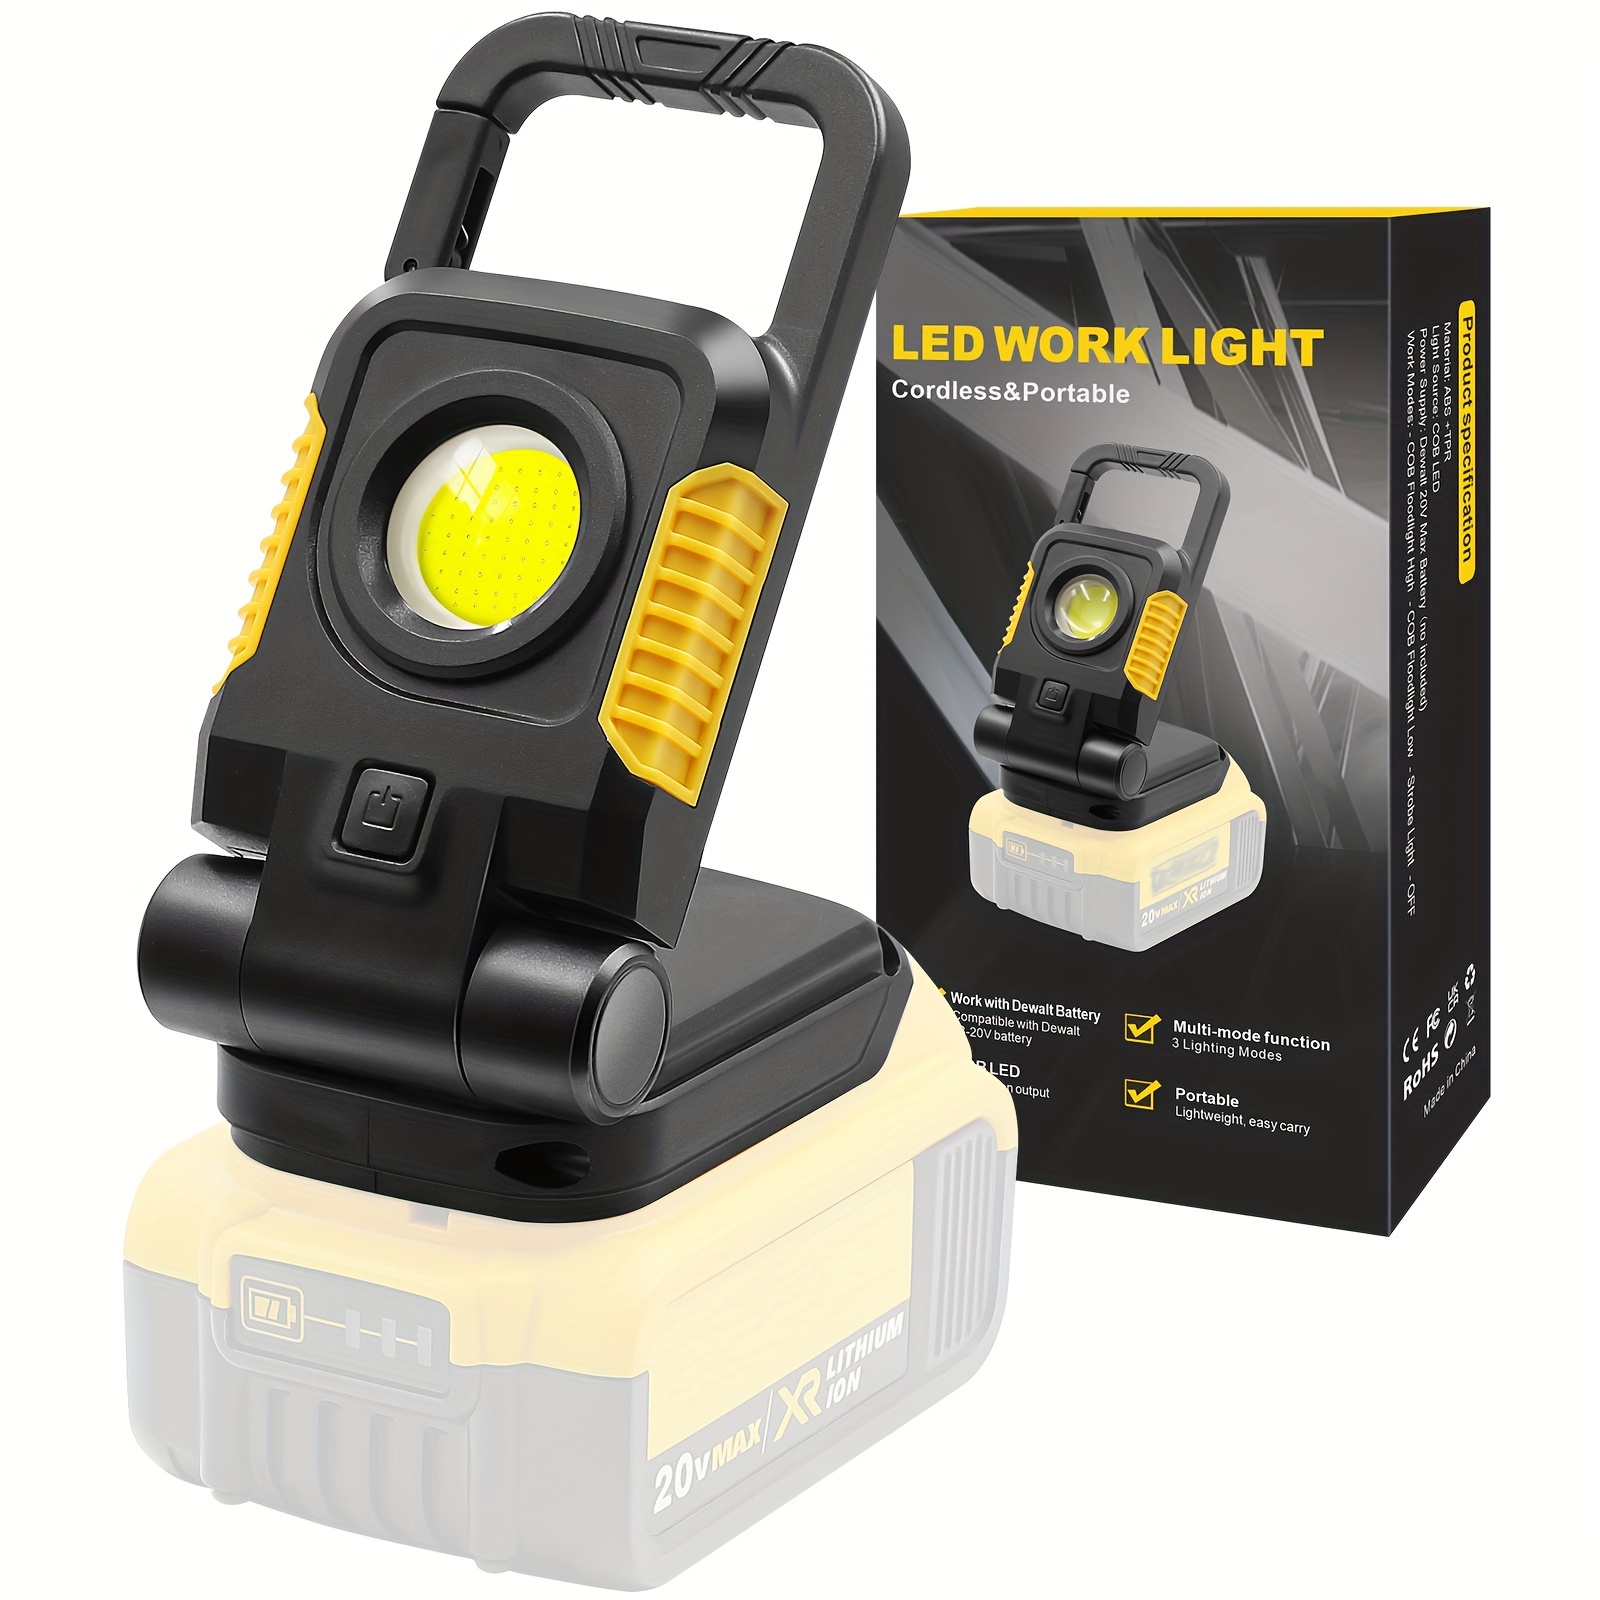 

Cordless Work Light, 25w Portable Flood Light Work For Max Battery, Super Bright Cob Led Work Light With 3 Light Modes And Upgraded Low Voltage Protection (no Battery)